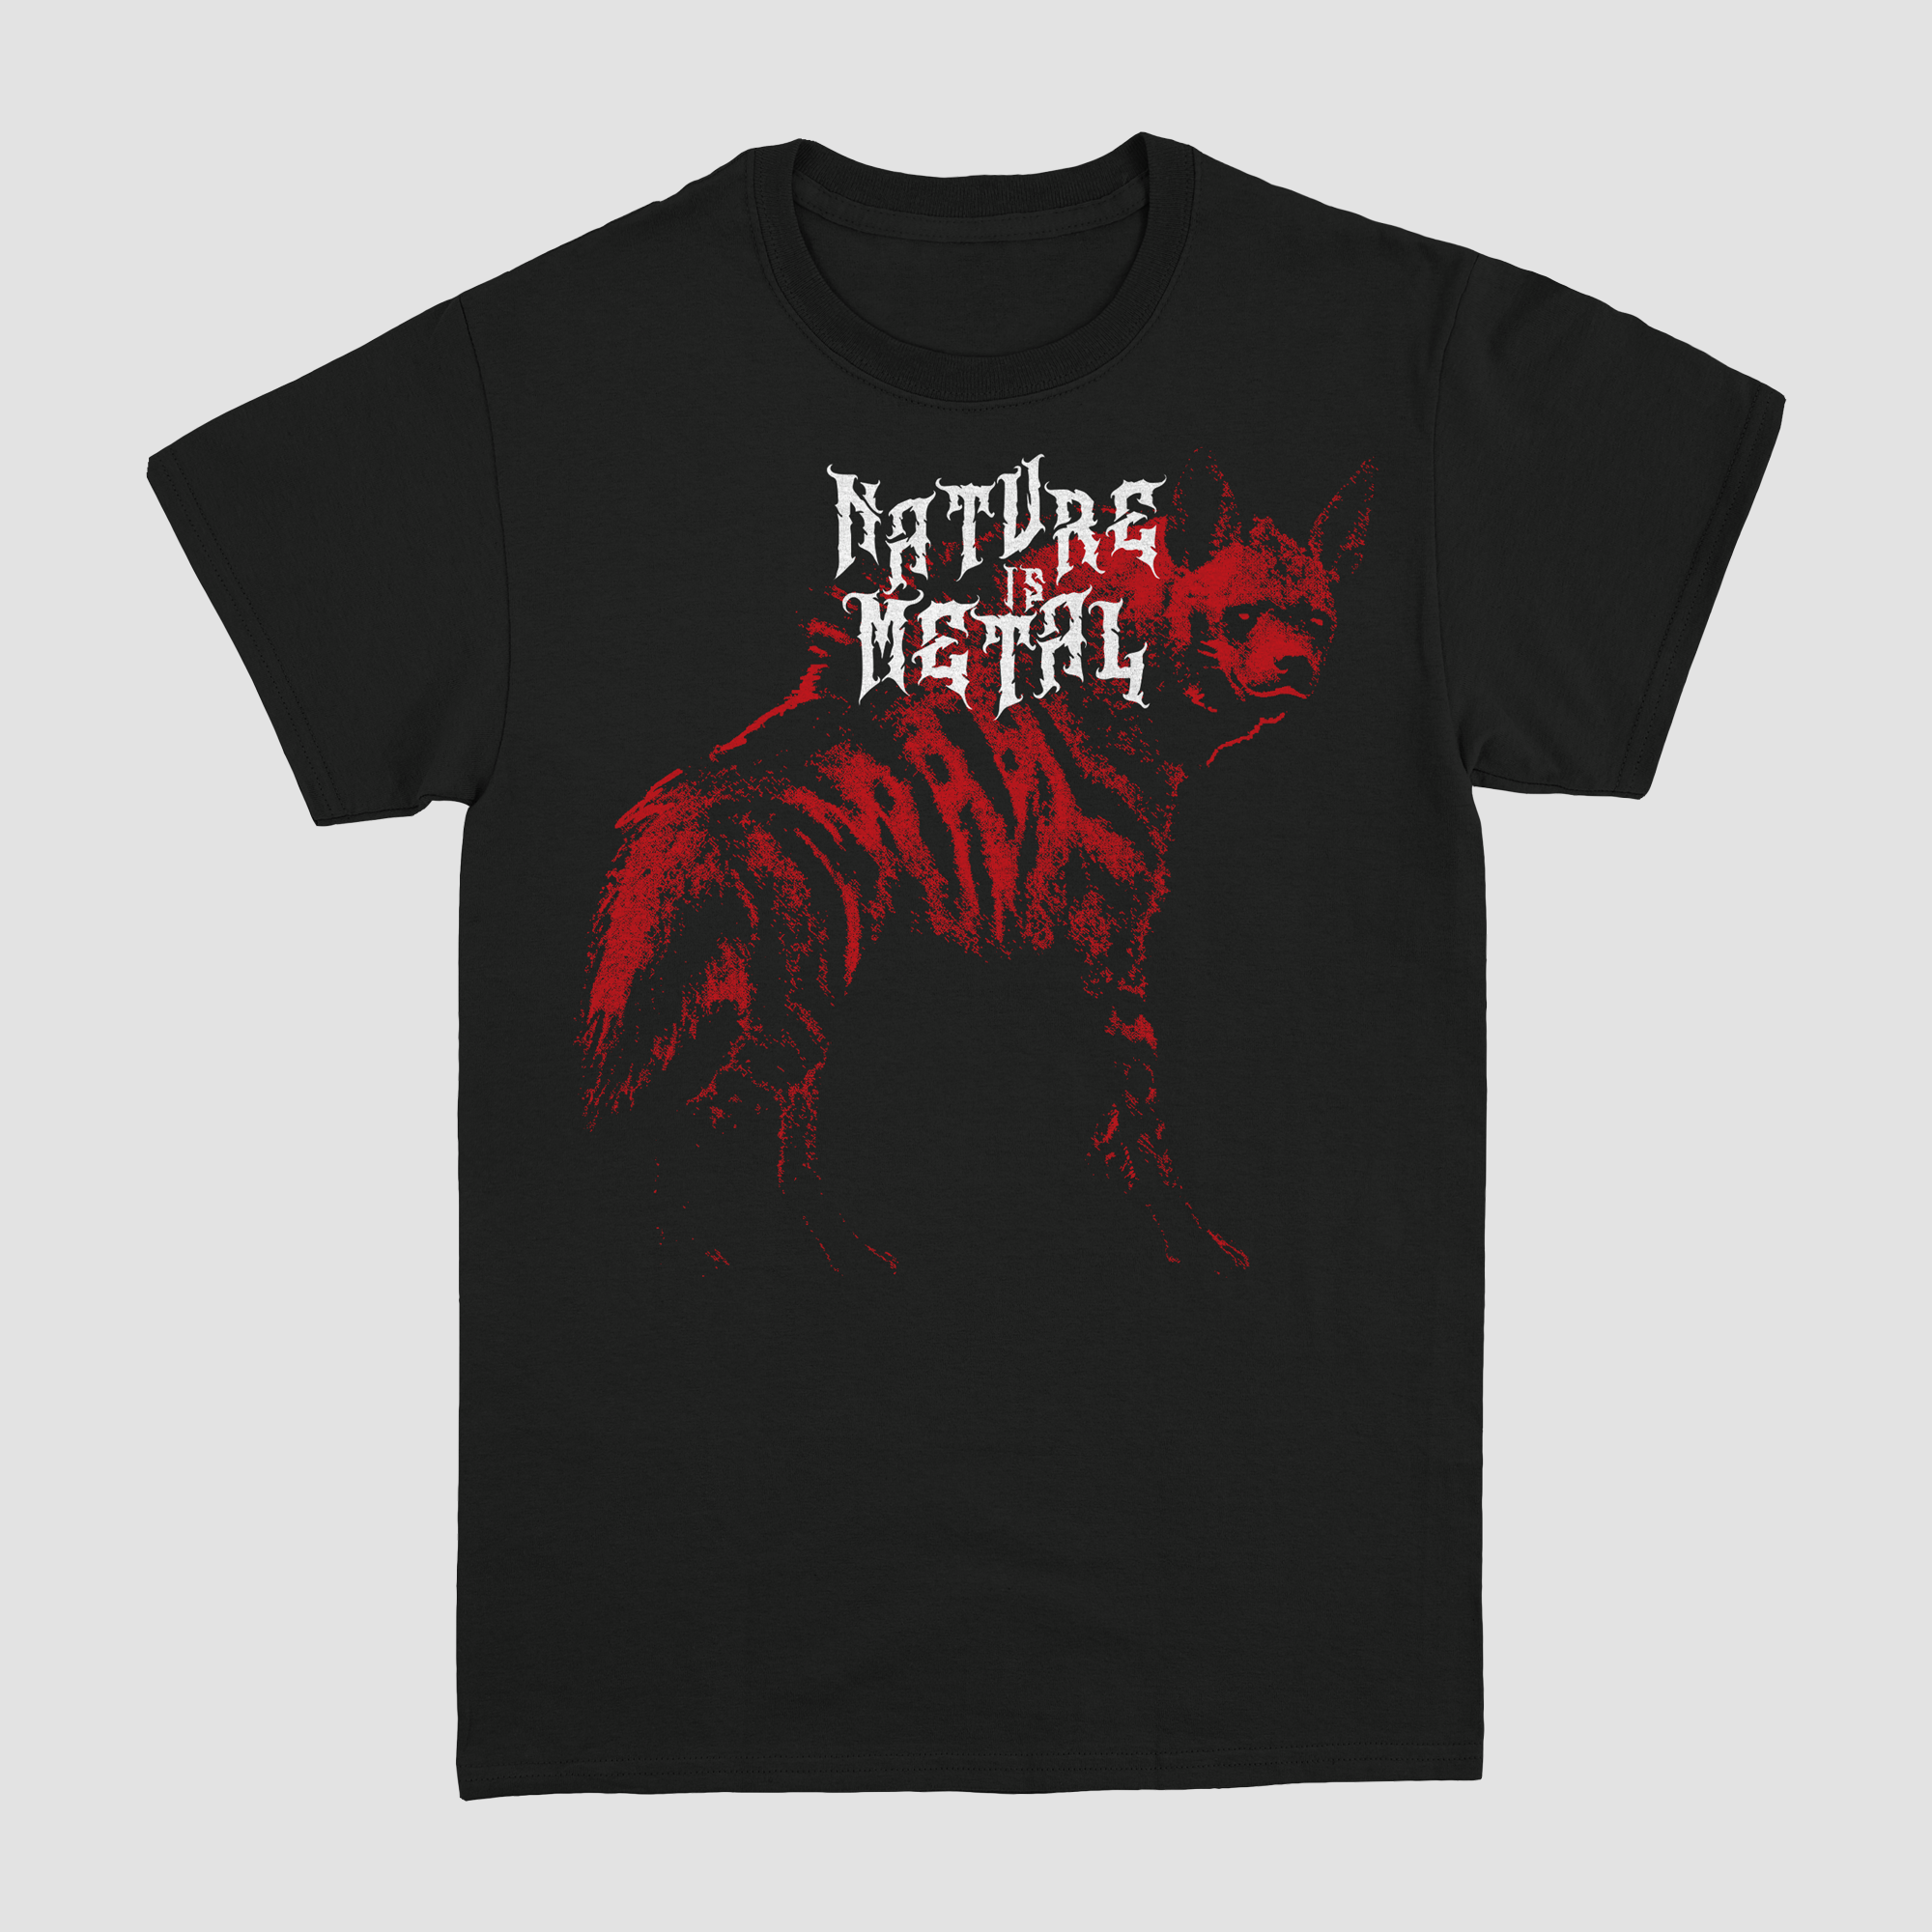 Hell Hyena "Limited Edition" T-Shirt